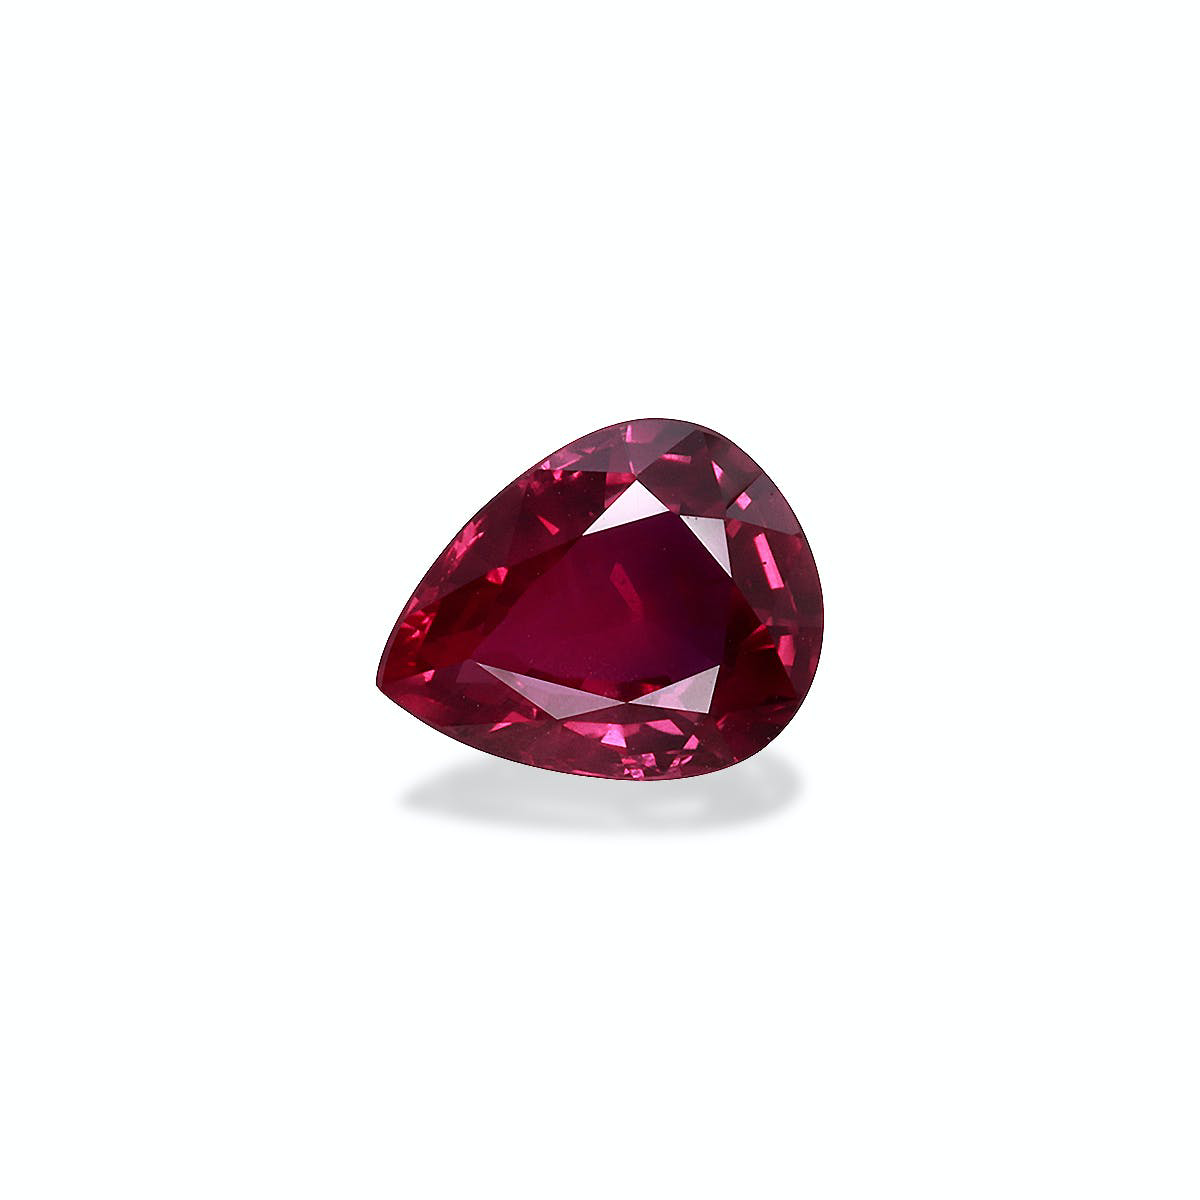 Picture of Unheated Mozambique Ruby 2.08ct - 9x7mm (S6-23)